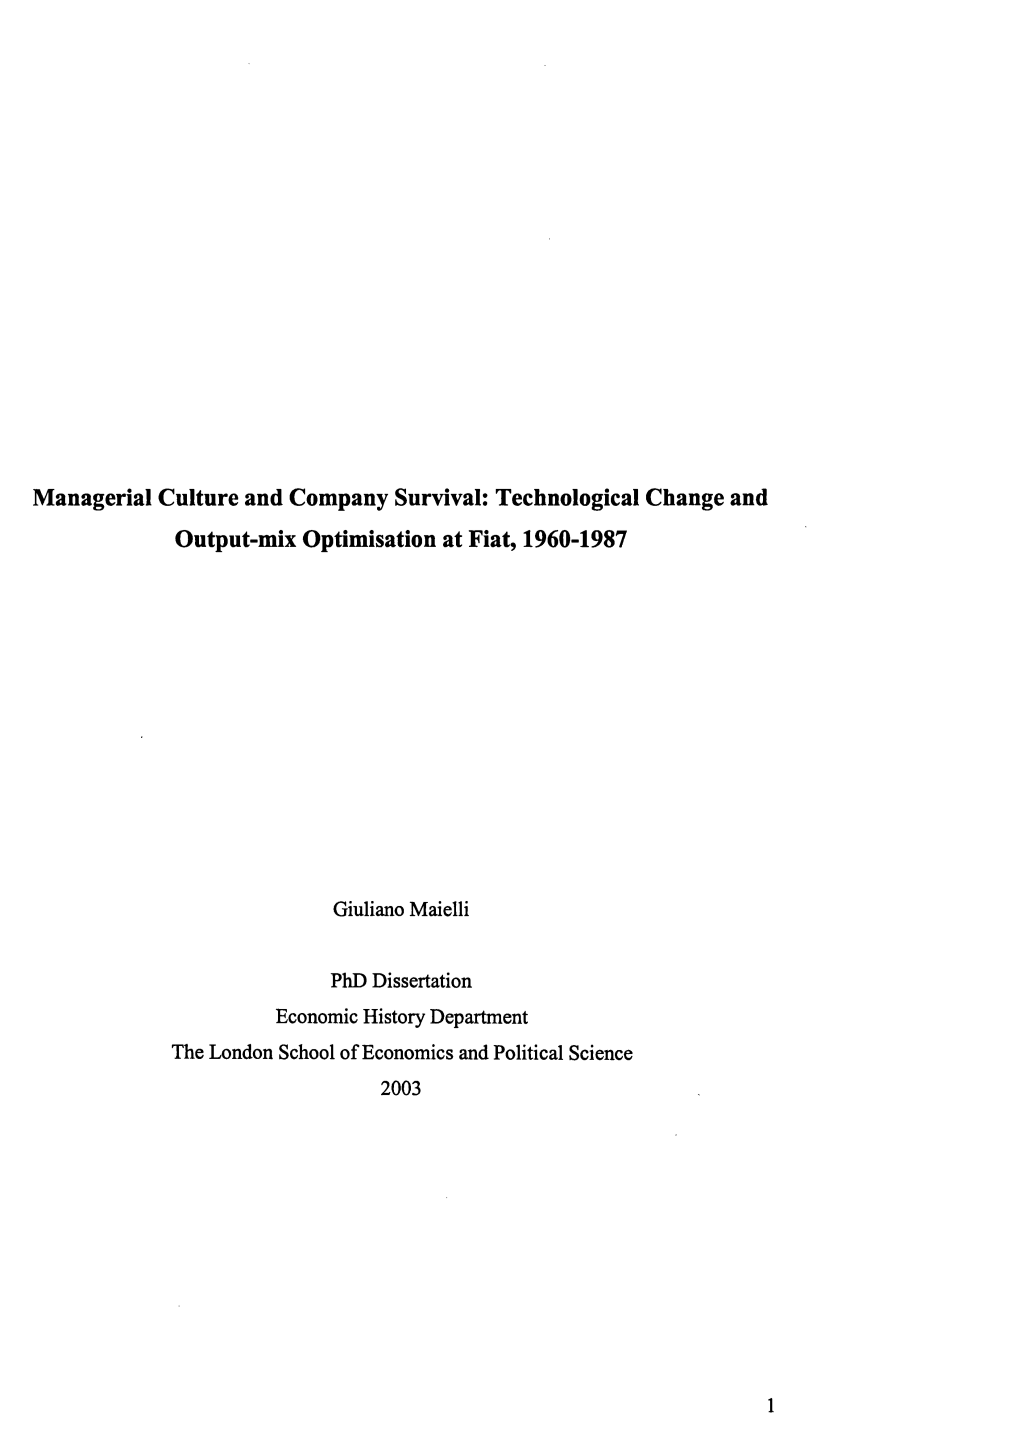 Technological Change and Output-Mix Optimisation at Fiat, 1960-1987